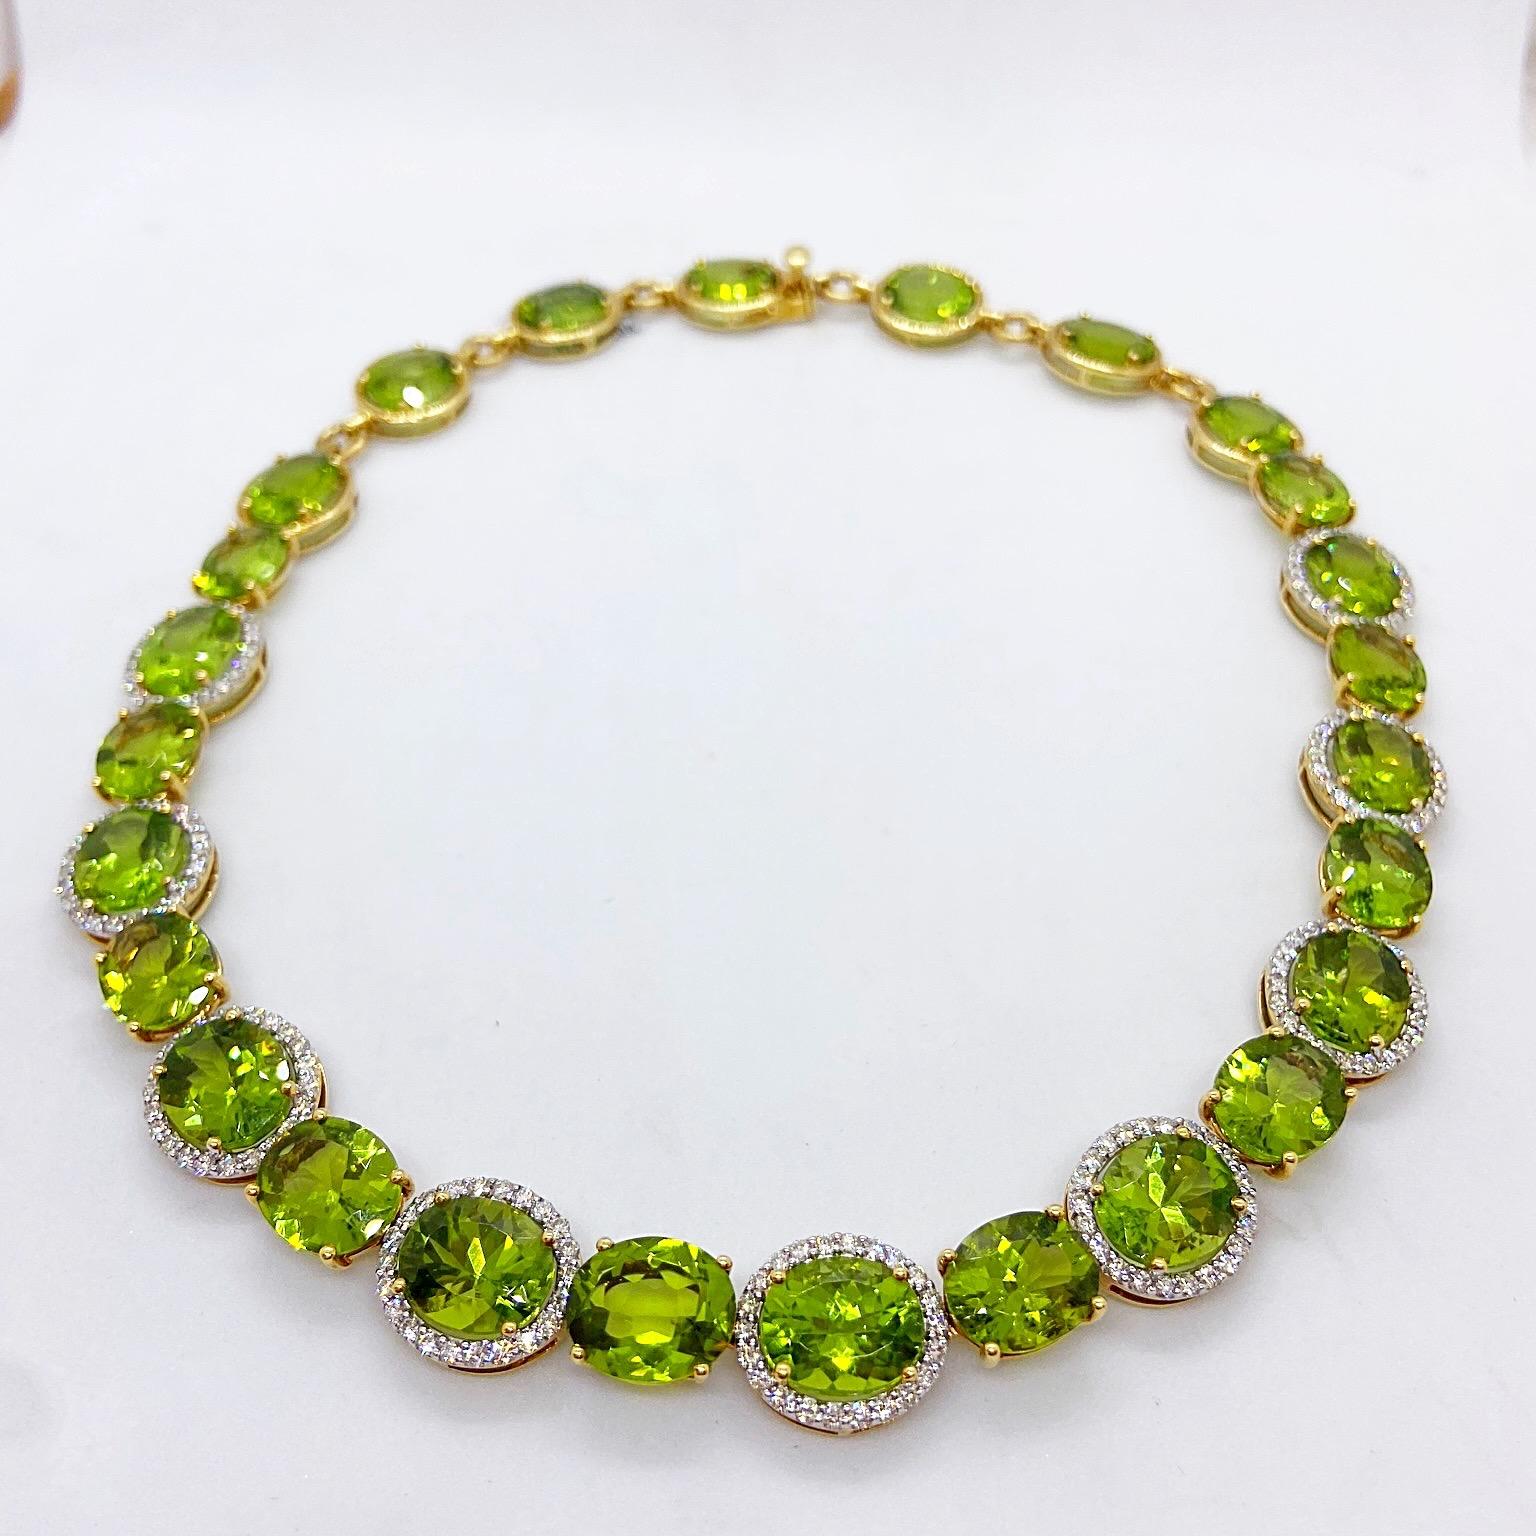 This impressive 18 karat yellow gold necklace has been set with 28 oval Peridot stones. The front 19 Oval Peridots alternate between Diamond bezel set and prong set. The 9 Peridots towards the back are set in yellow gold bezel settings. The total